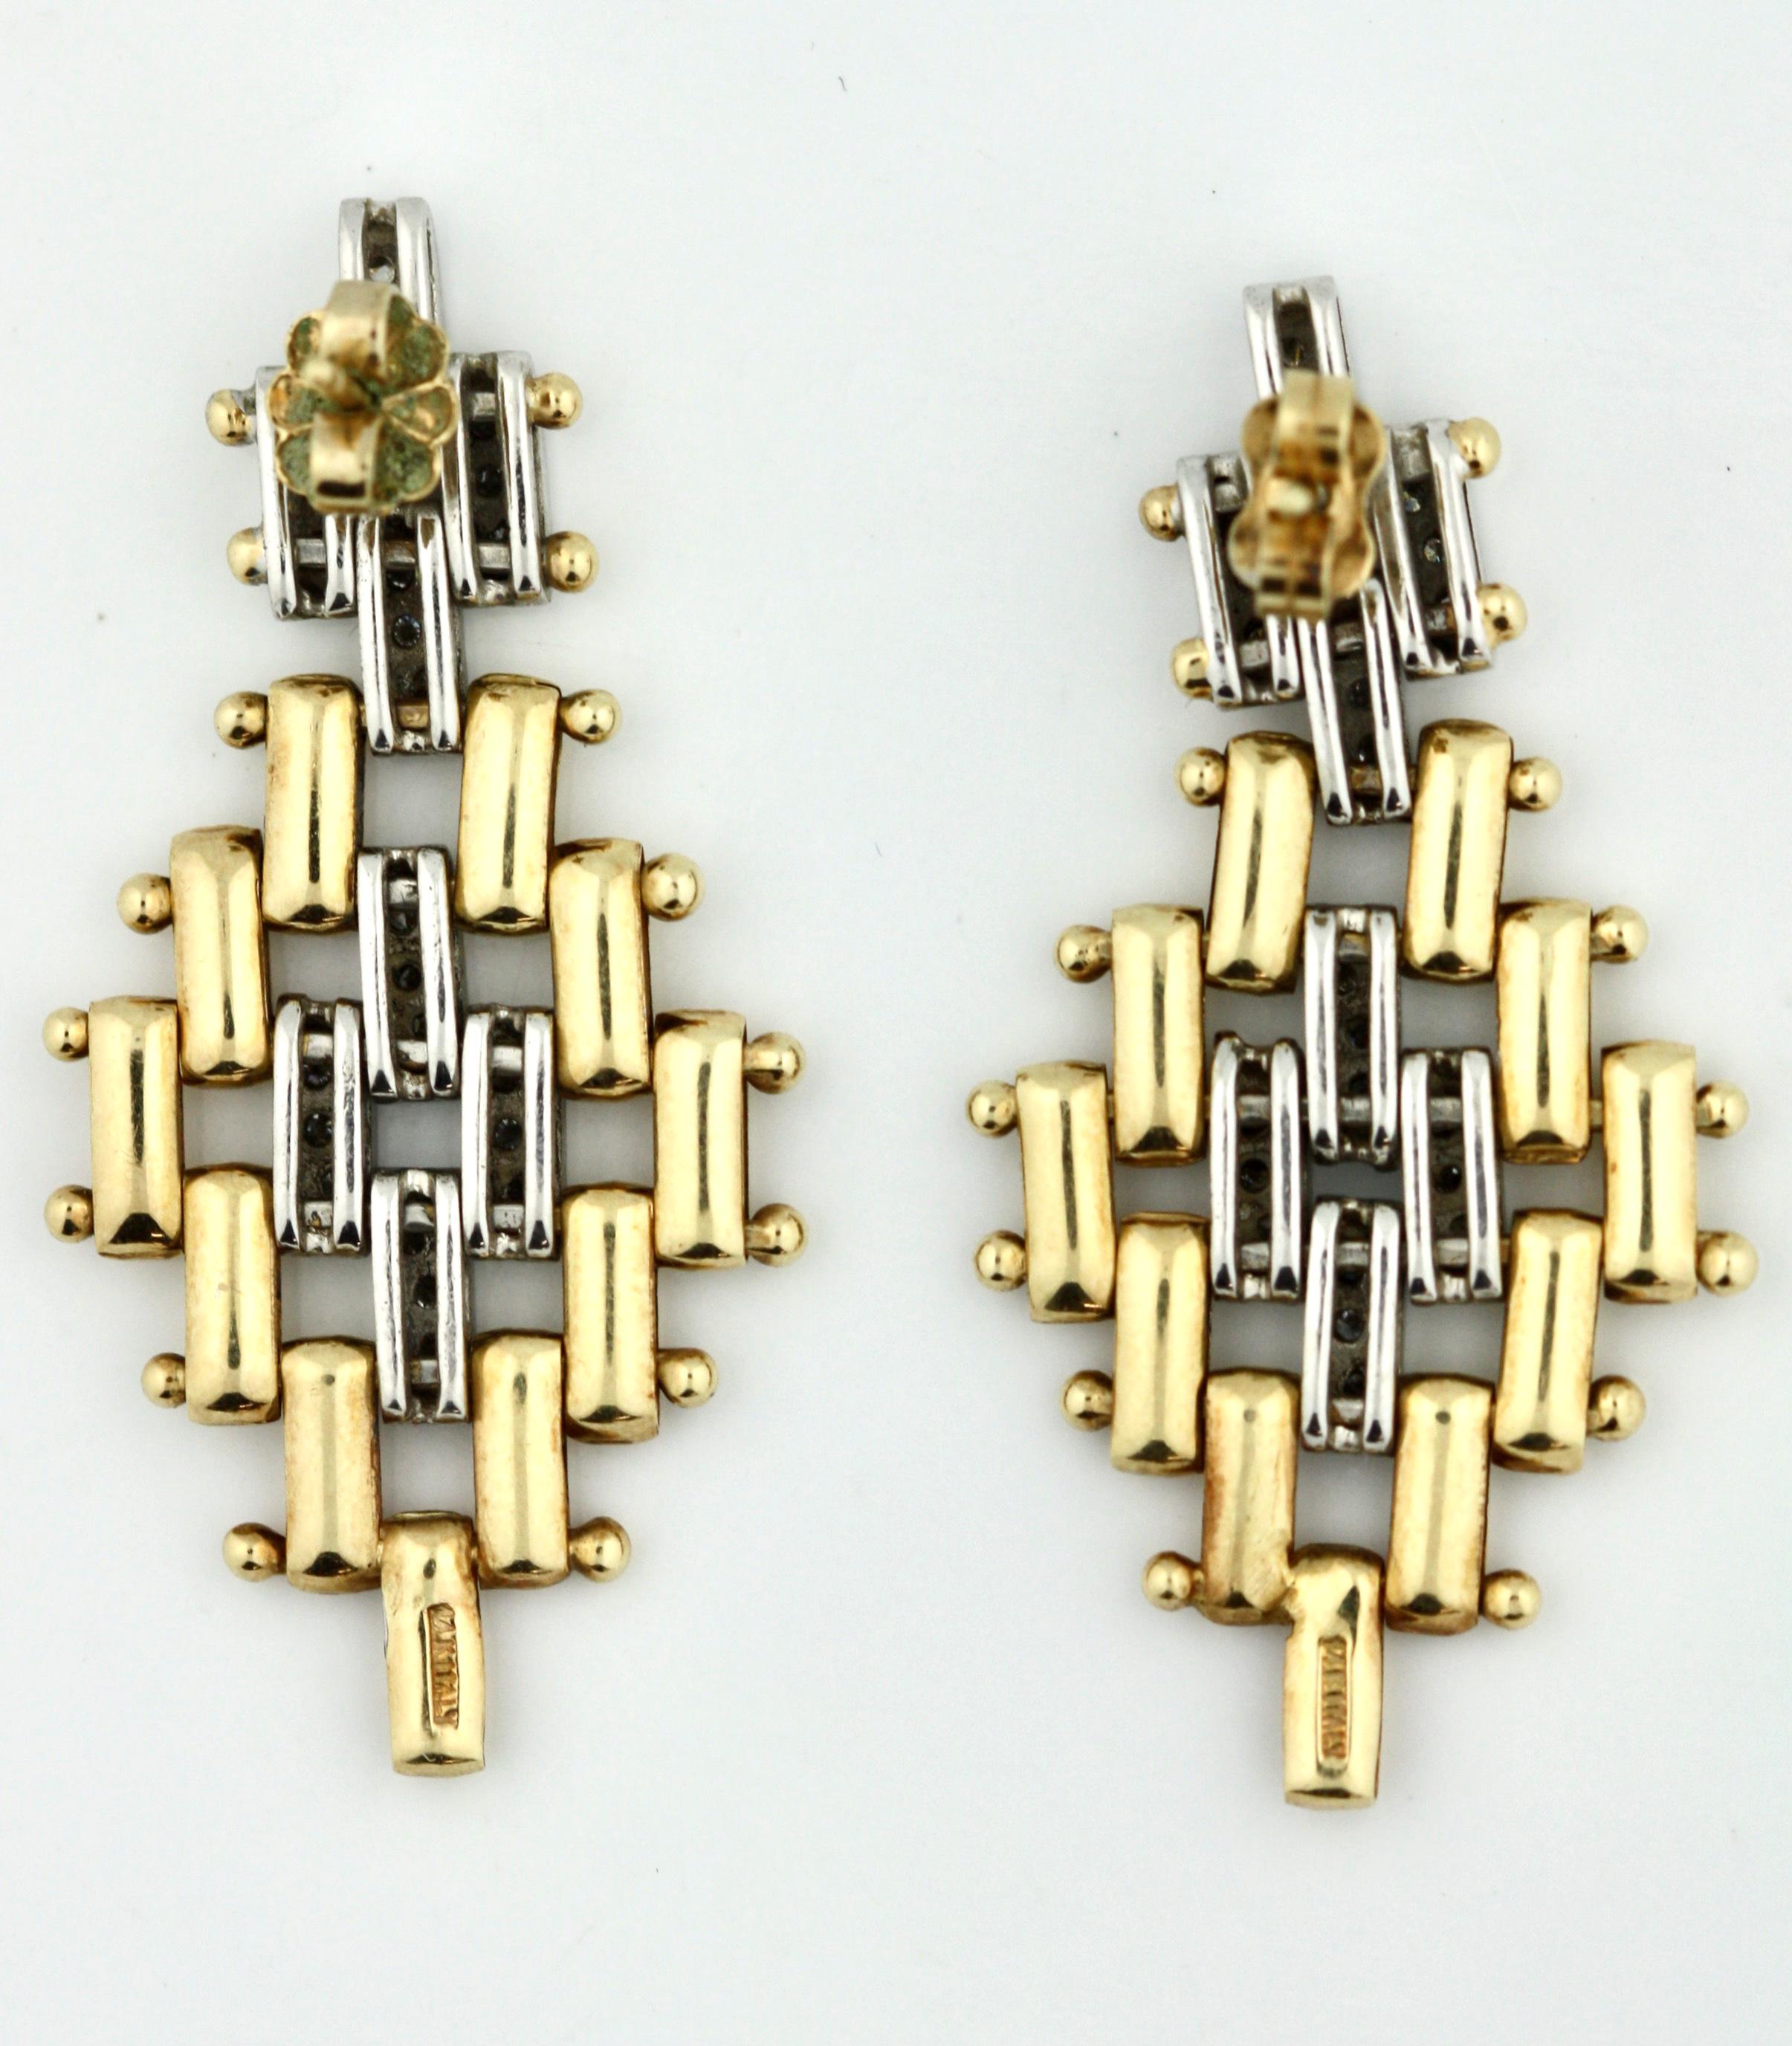 
Pair of Gold and Diamond Earrings
The four row flex design set with round diamonds, Diamonds weighing a total of approximately 1.10 carats, Width 3/4 inch, Height 1 1/2 inch, 14 karat yellow gold, circa 1970s, Gross weight approximately 7.6 dwts,